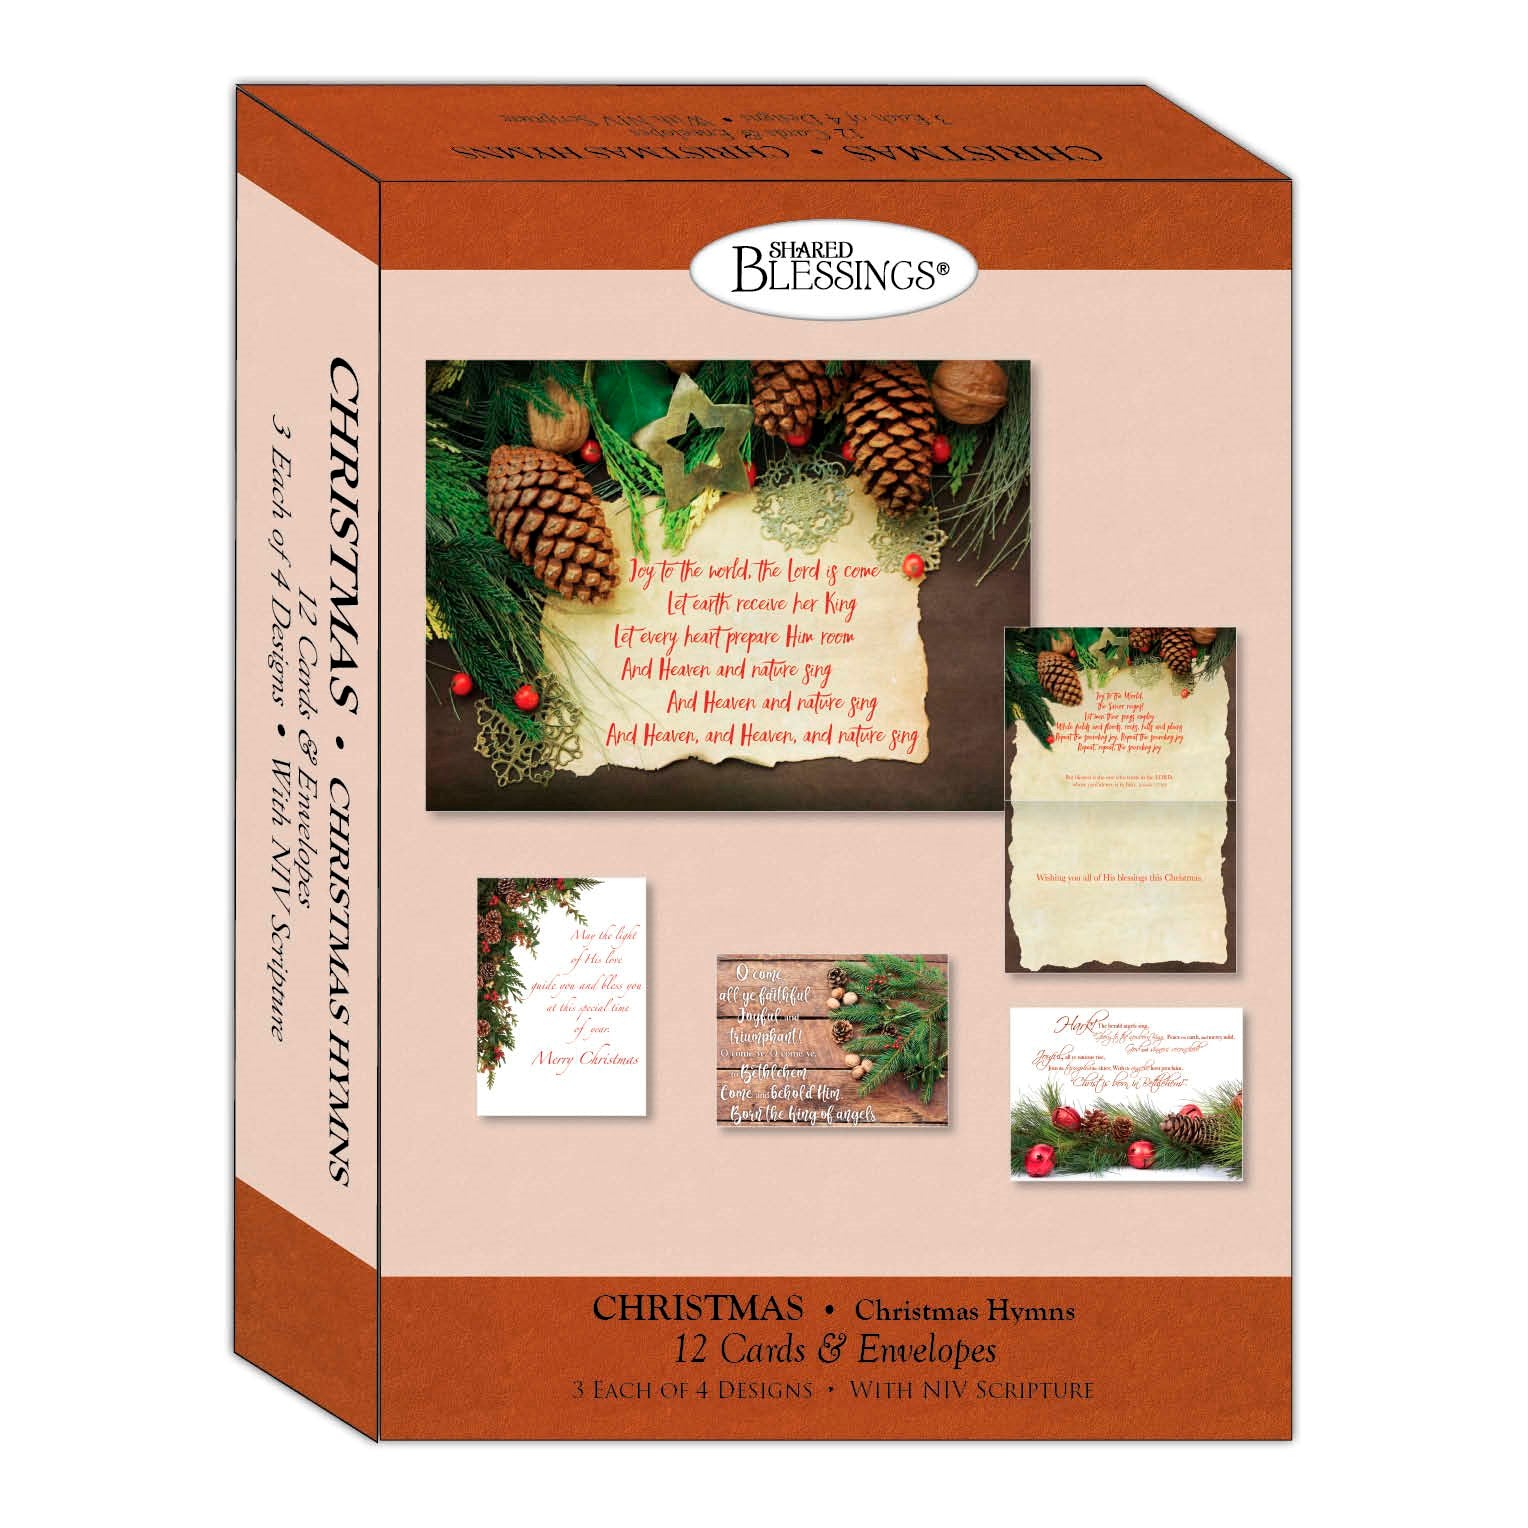 Seed of Abraham Christian Bookstore - (In)Courage - Card-Boxed-Shared Blessings-Christmas-Assorted/Hymns (Box Of 12)